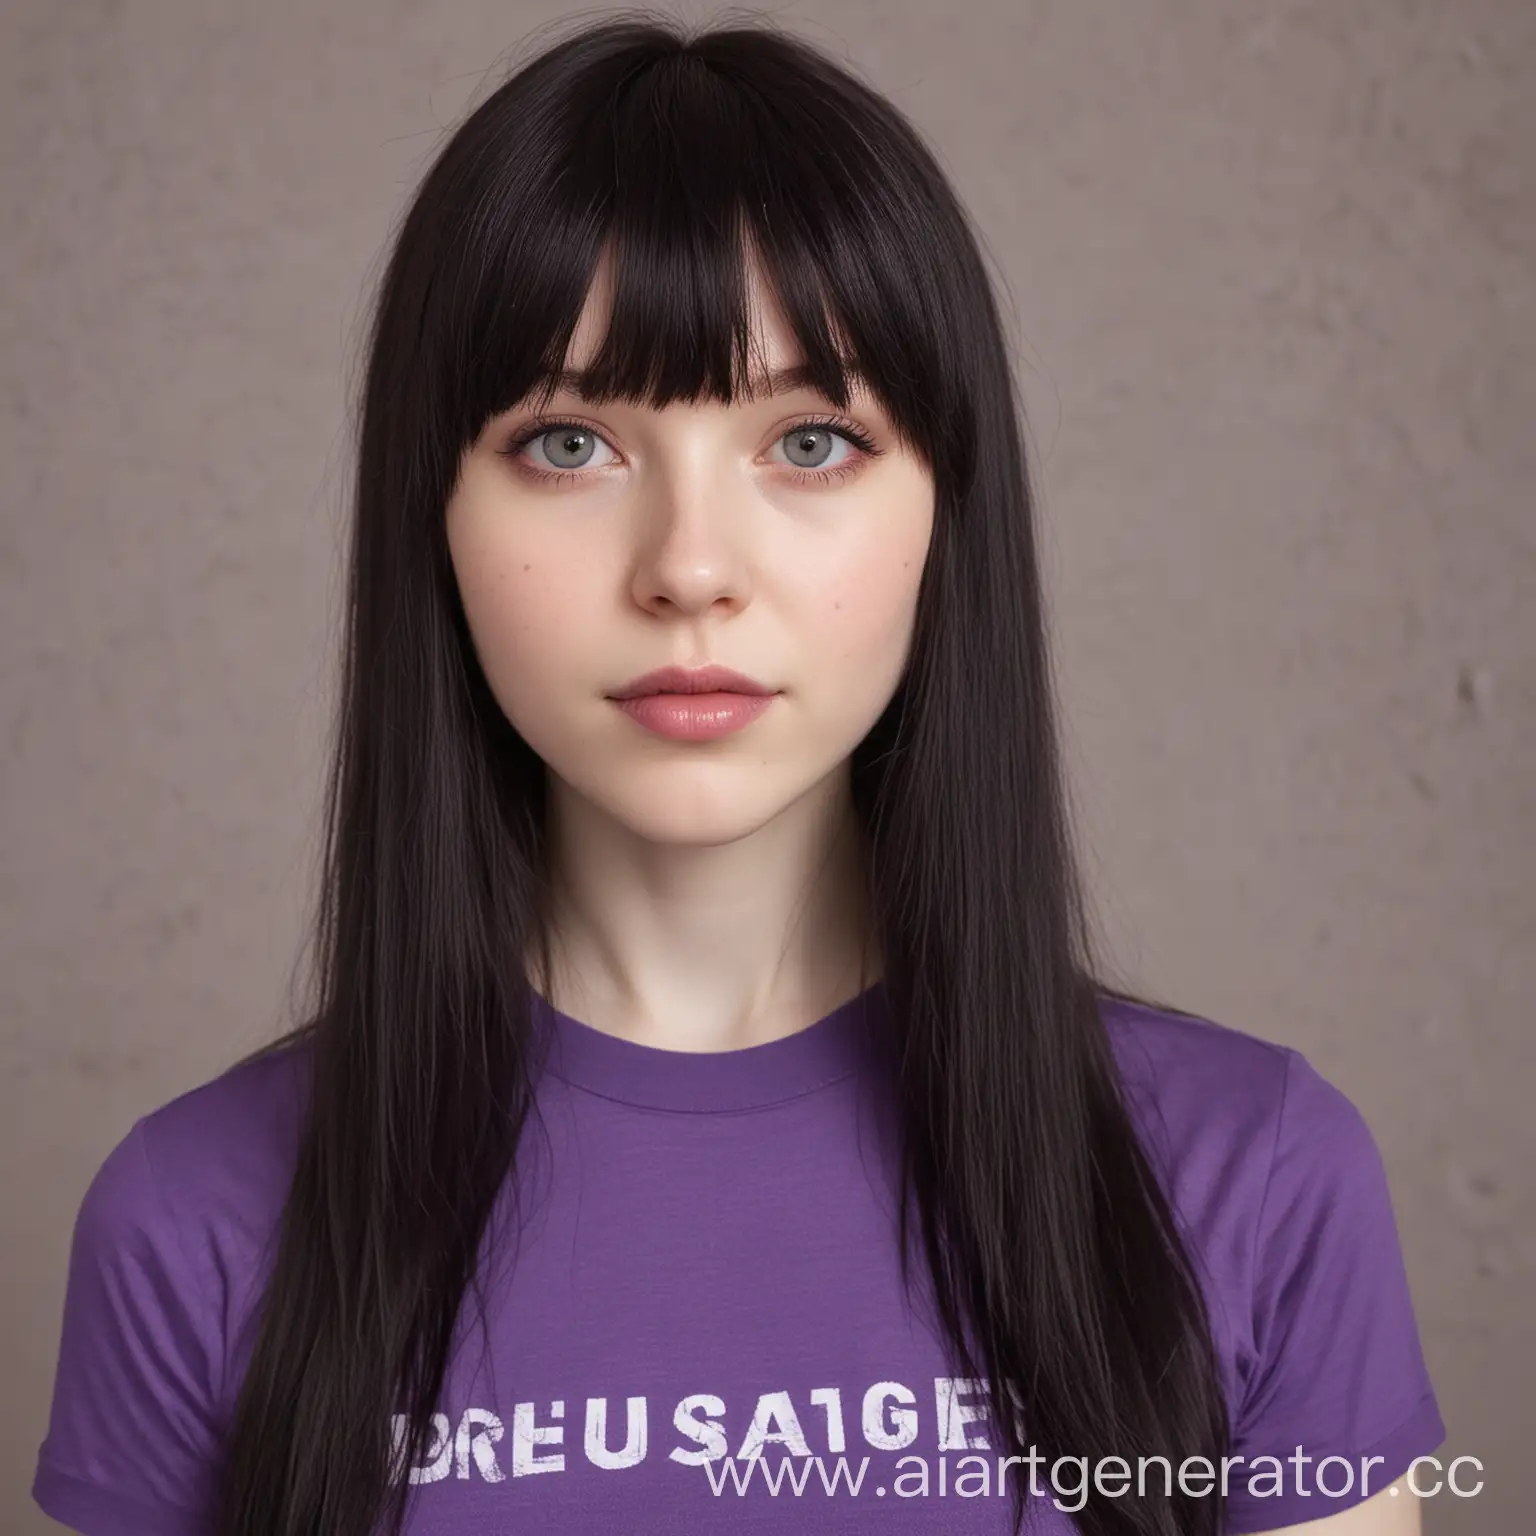 A girl with long dark hair and straight bangs, pale skin, wearing a purple T-shirt.